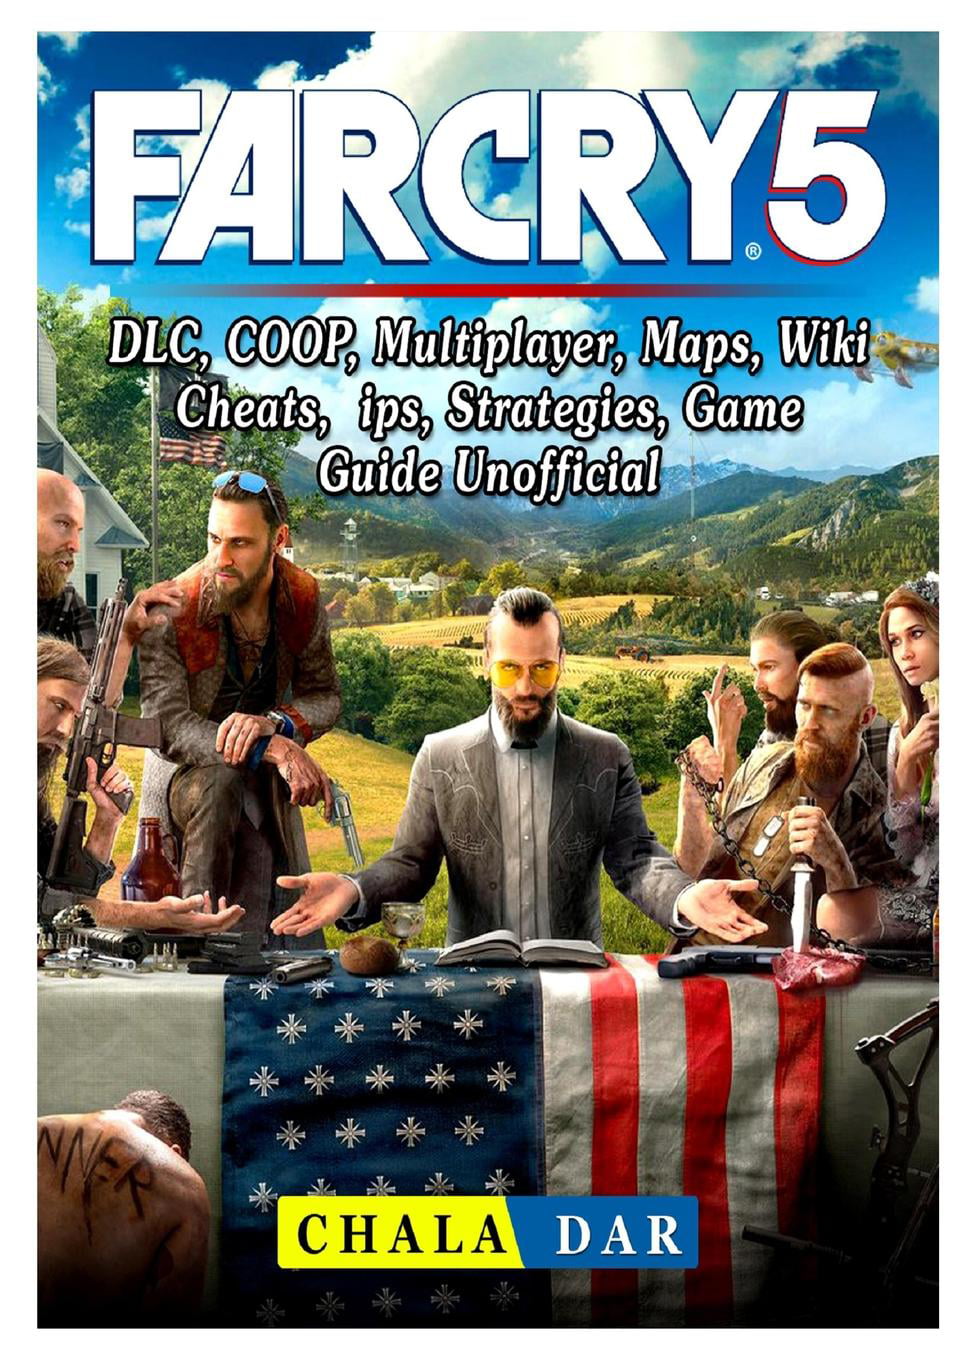 Far Cry 5 Dlc Coop Multiplayer Maps Wiki Cheats Tips Strategies Game Guide Unofficial Paperback Walmart Com